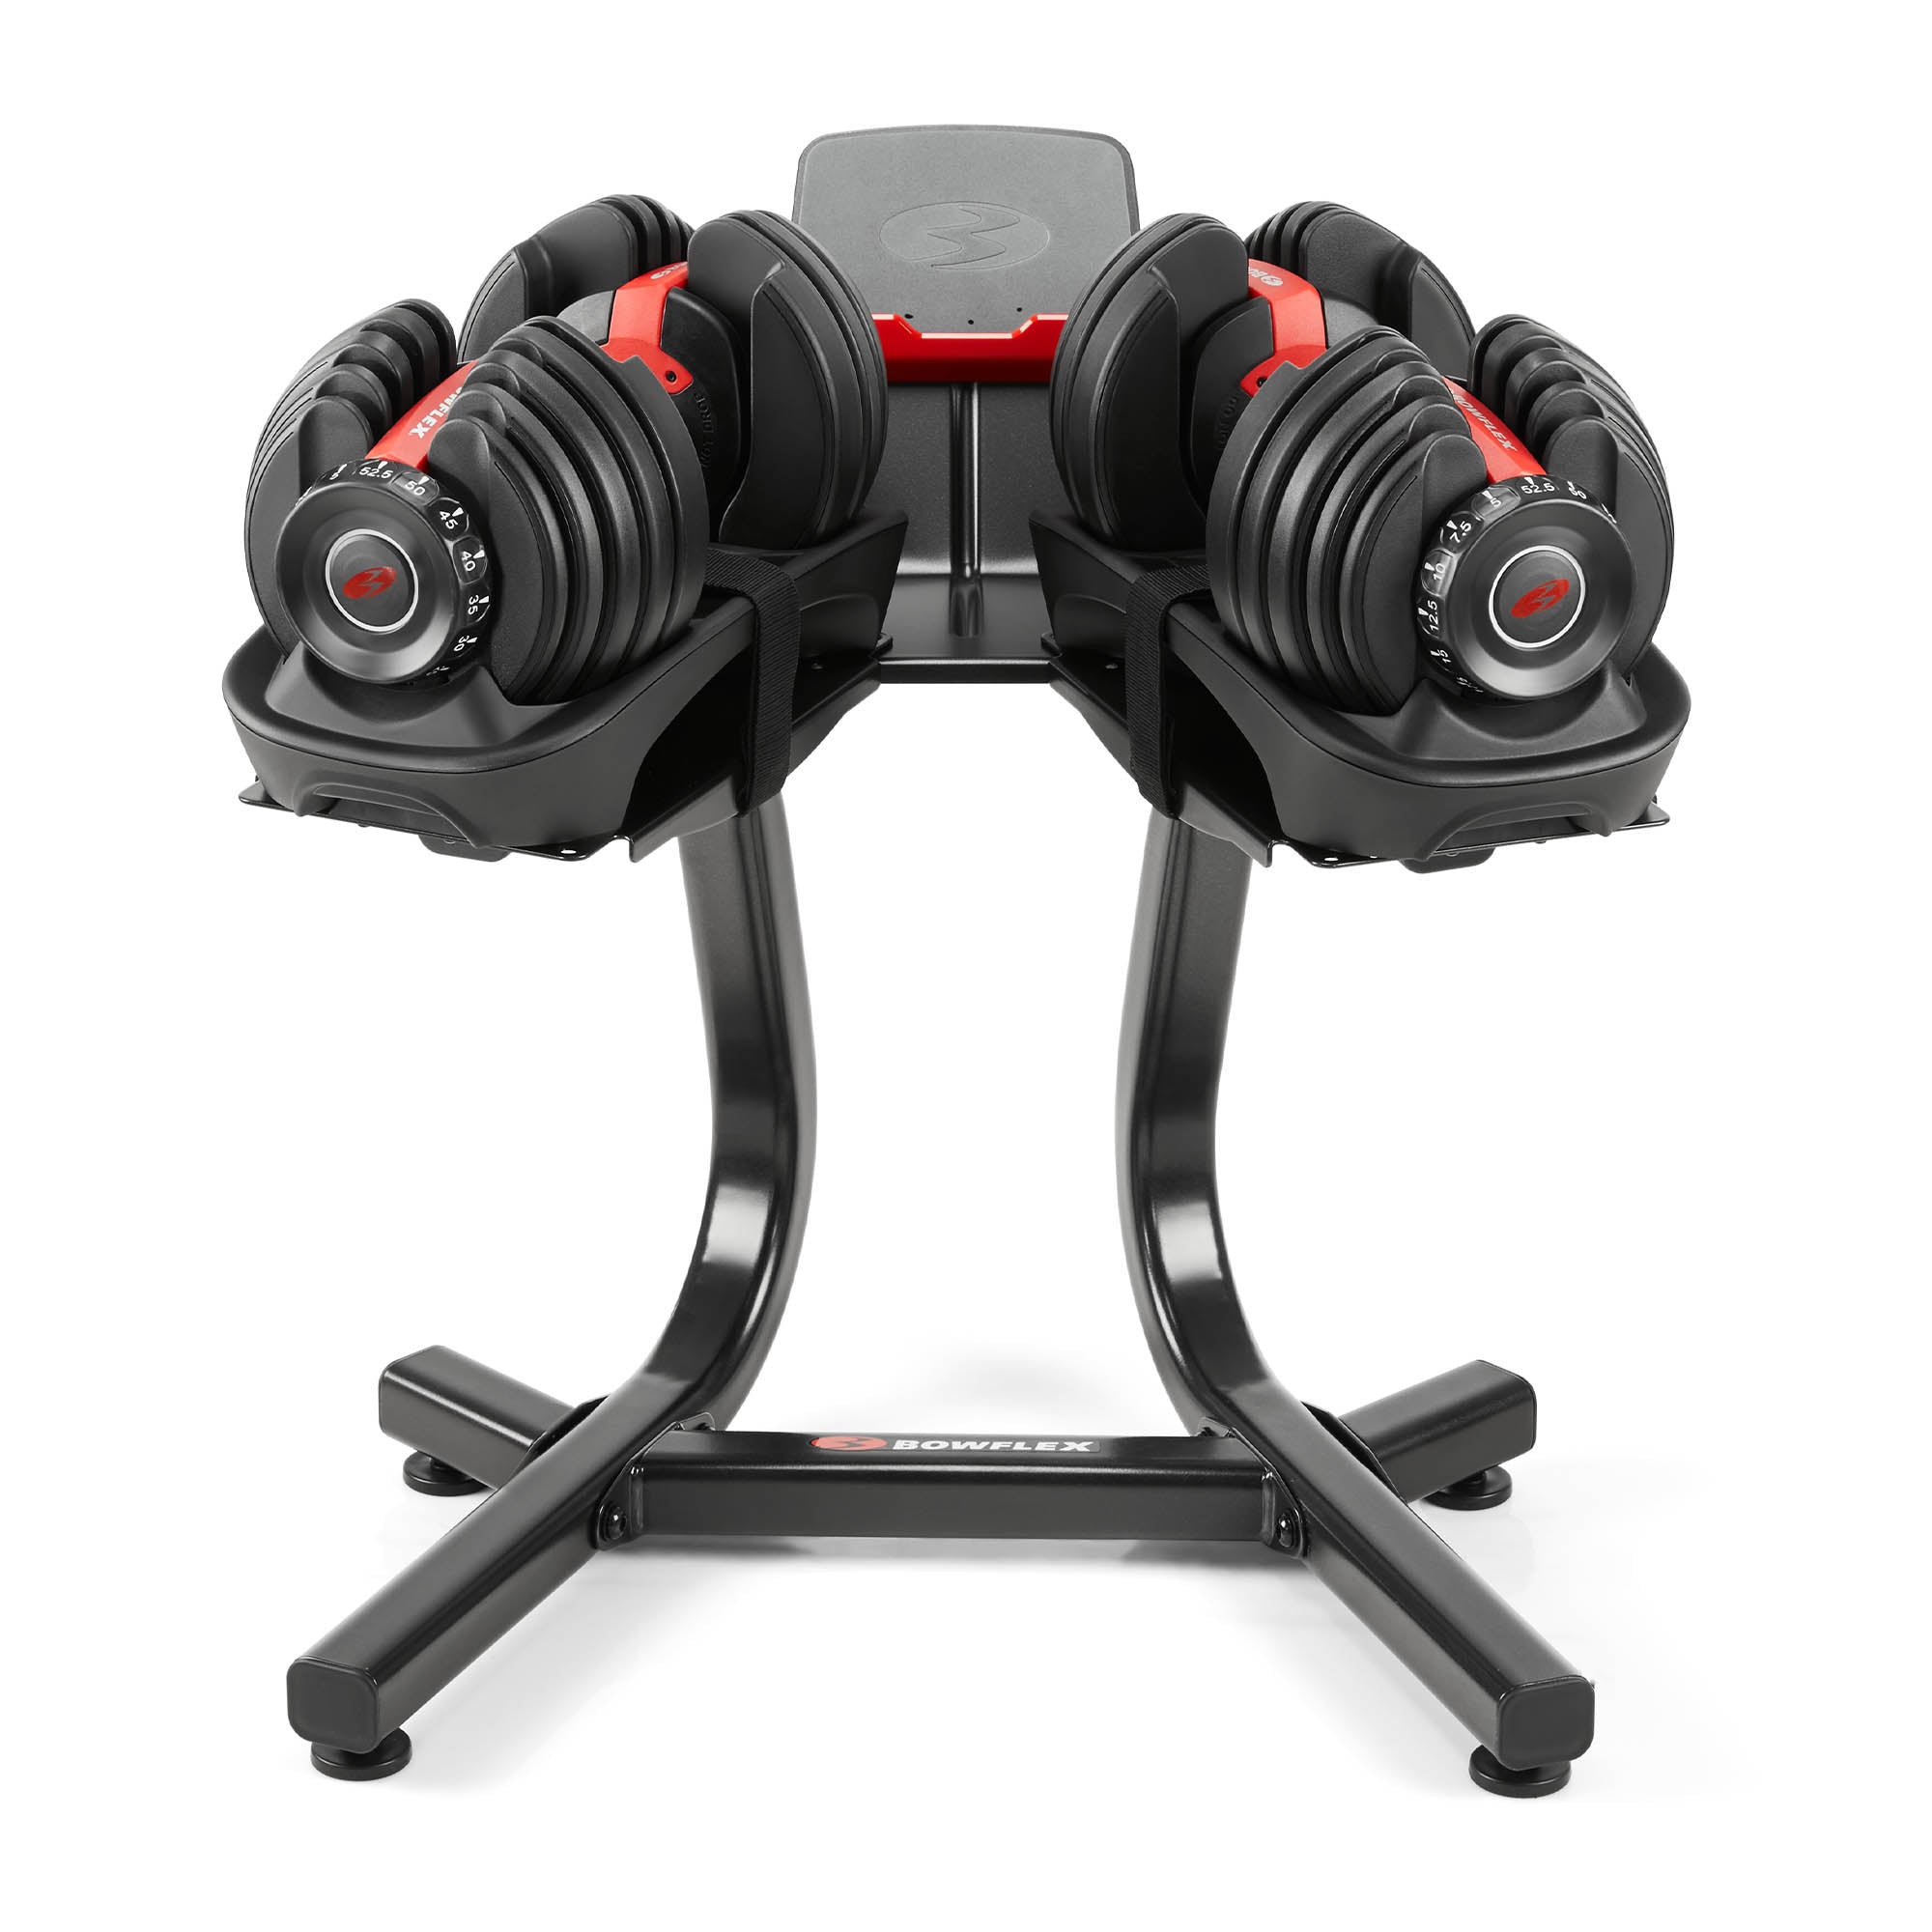 BowFlex SelectTech 552i Adjustable Dumbbell Set with Stand